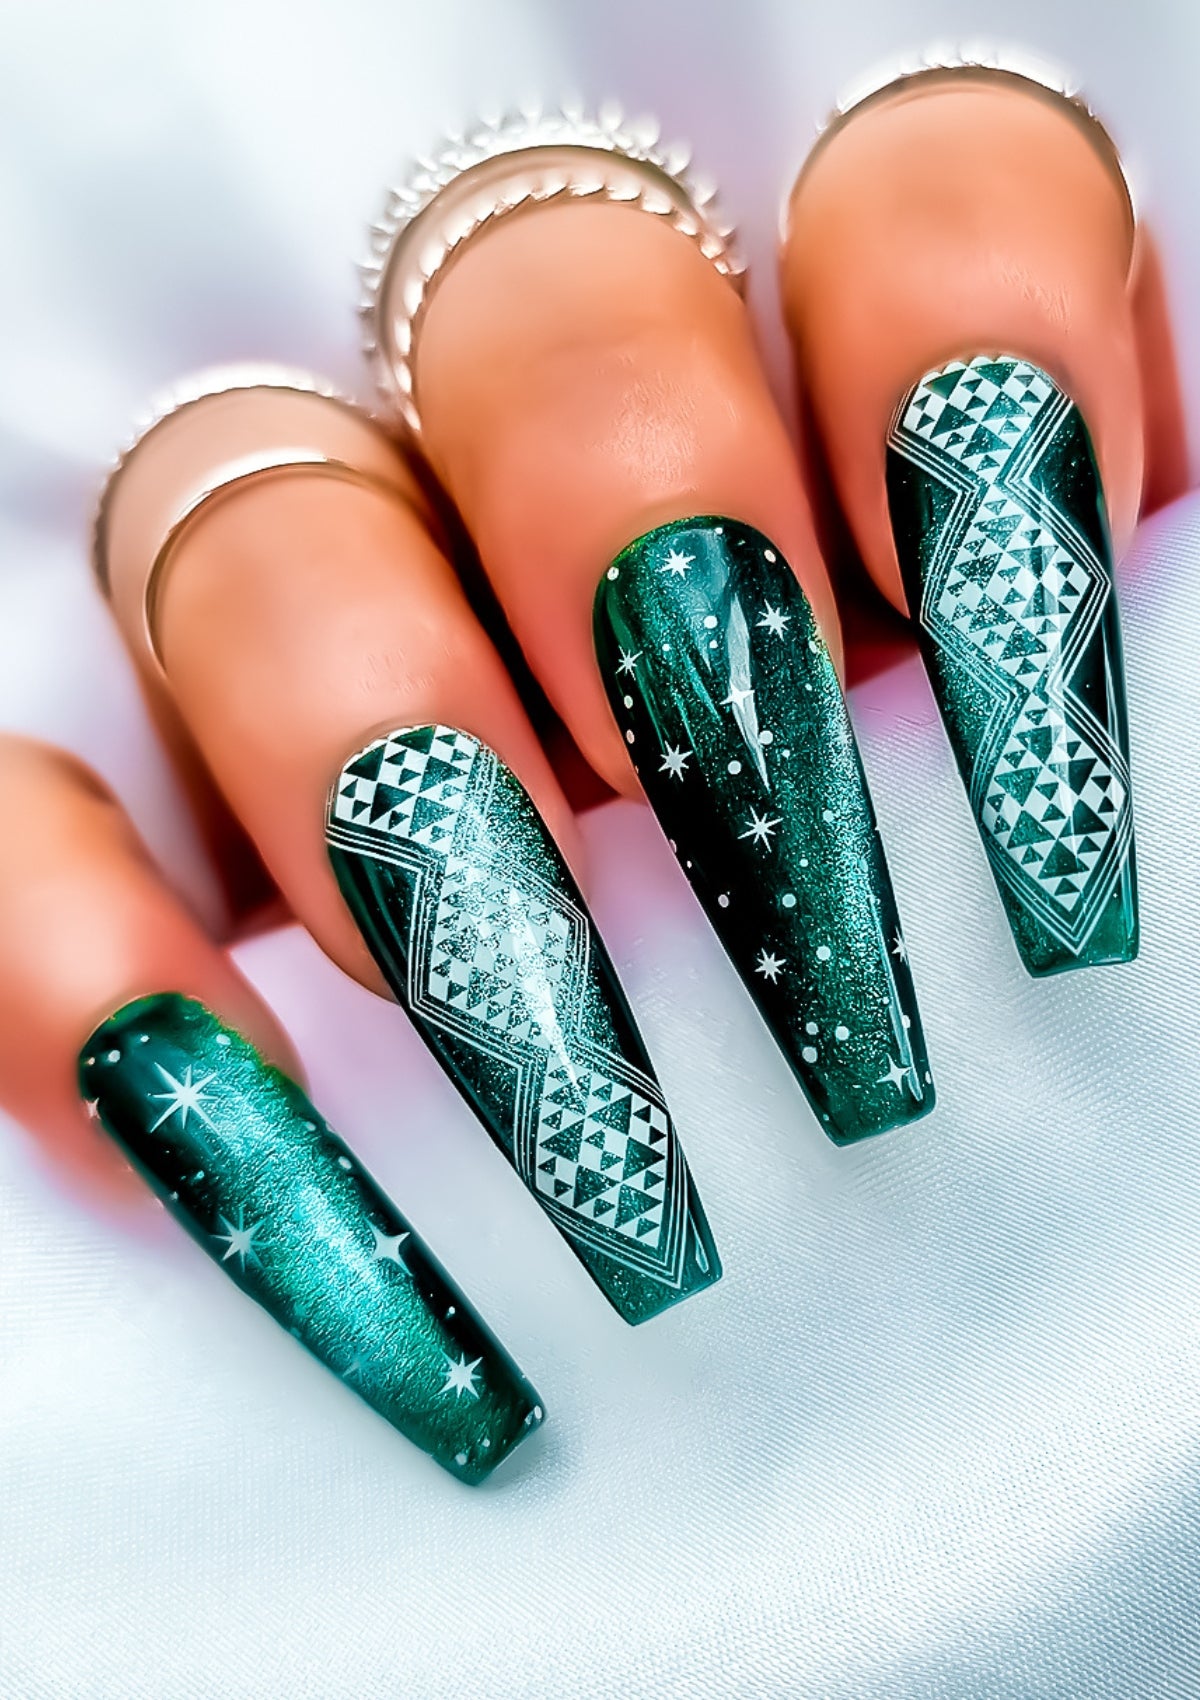 Long coffin shaped nails in emerald cat eye gel polish with white Maori nail art in Aonui design by Adrienne Whitewood on the index and ring fingers, and stars on the pinky and middle fingers. 